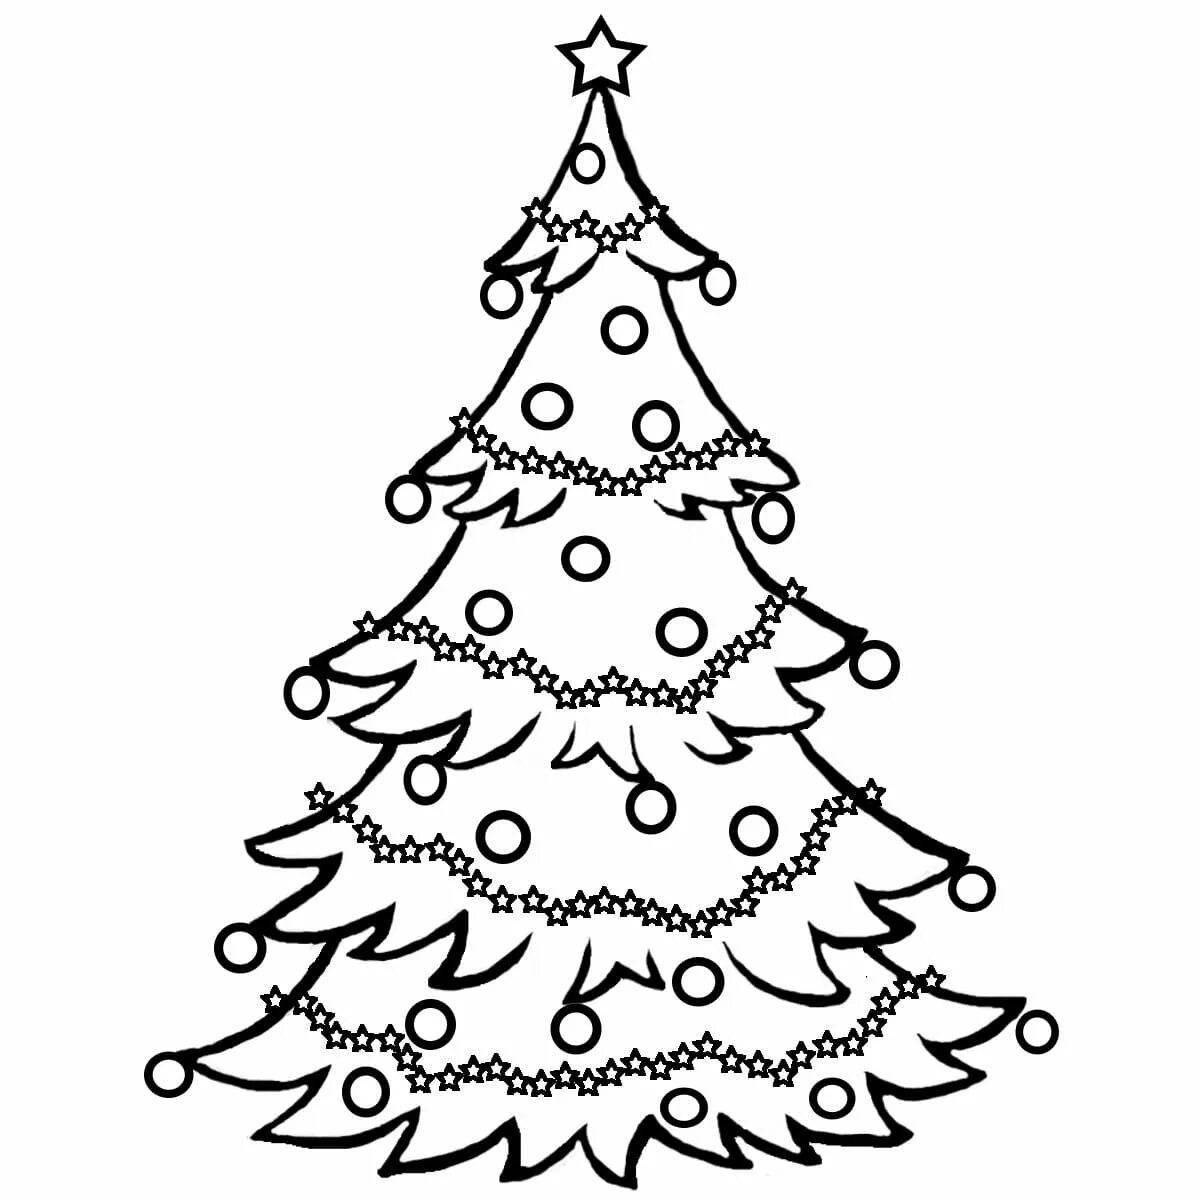 Luminous Christmas tree coloring book for 4-5 year olds